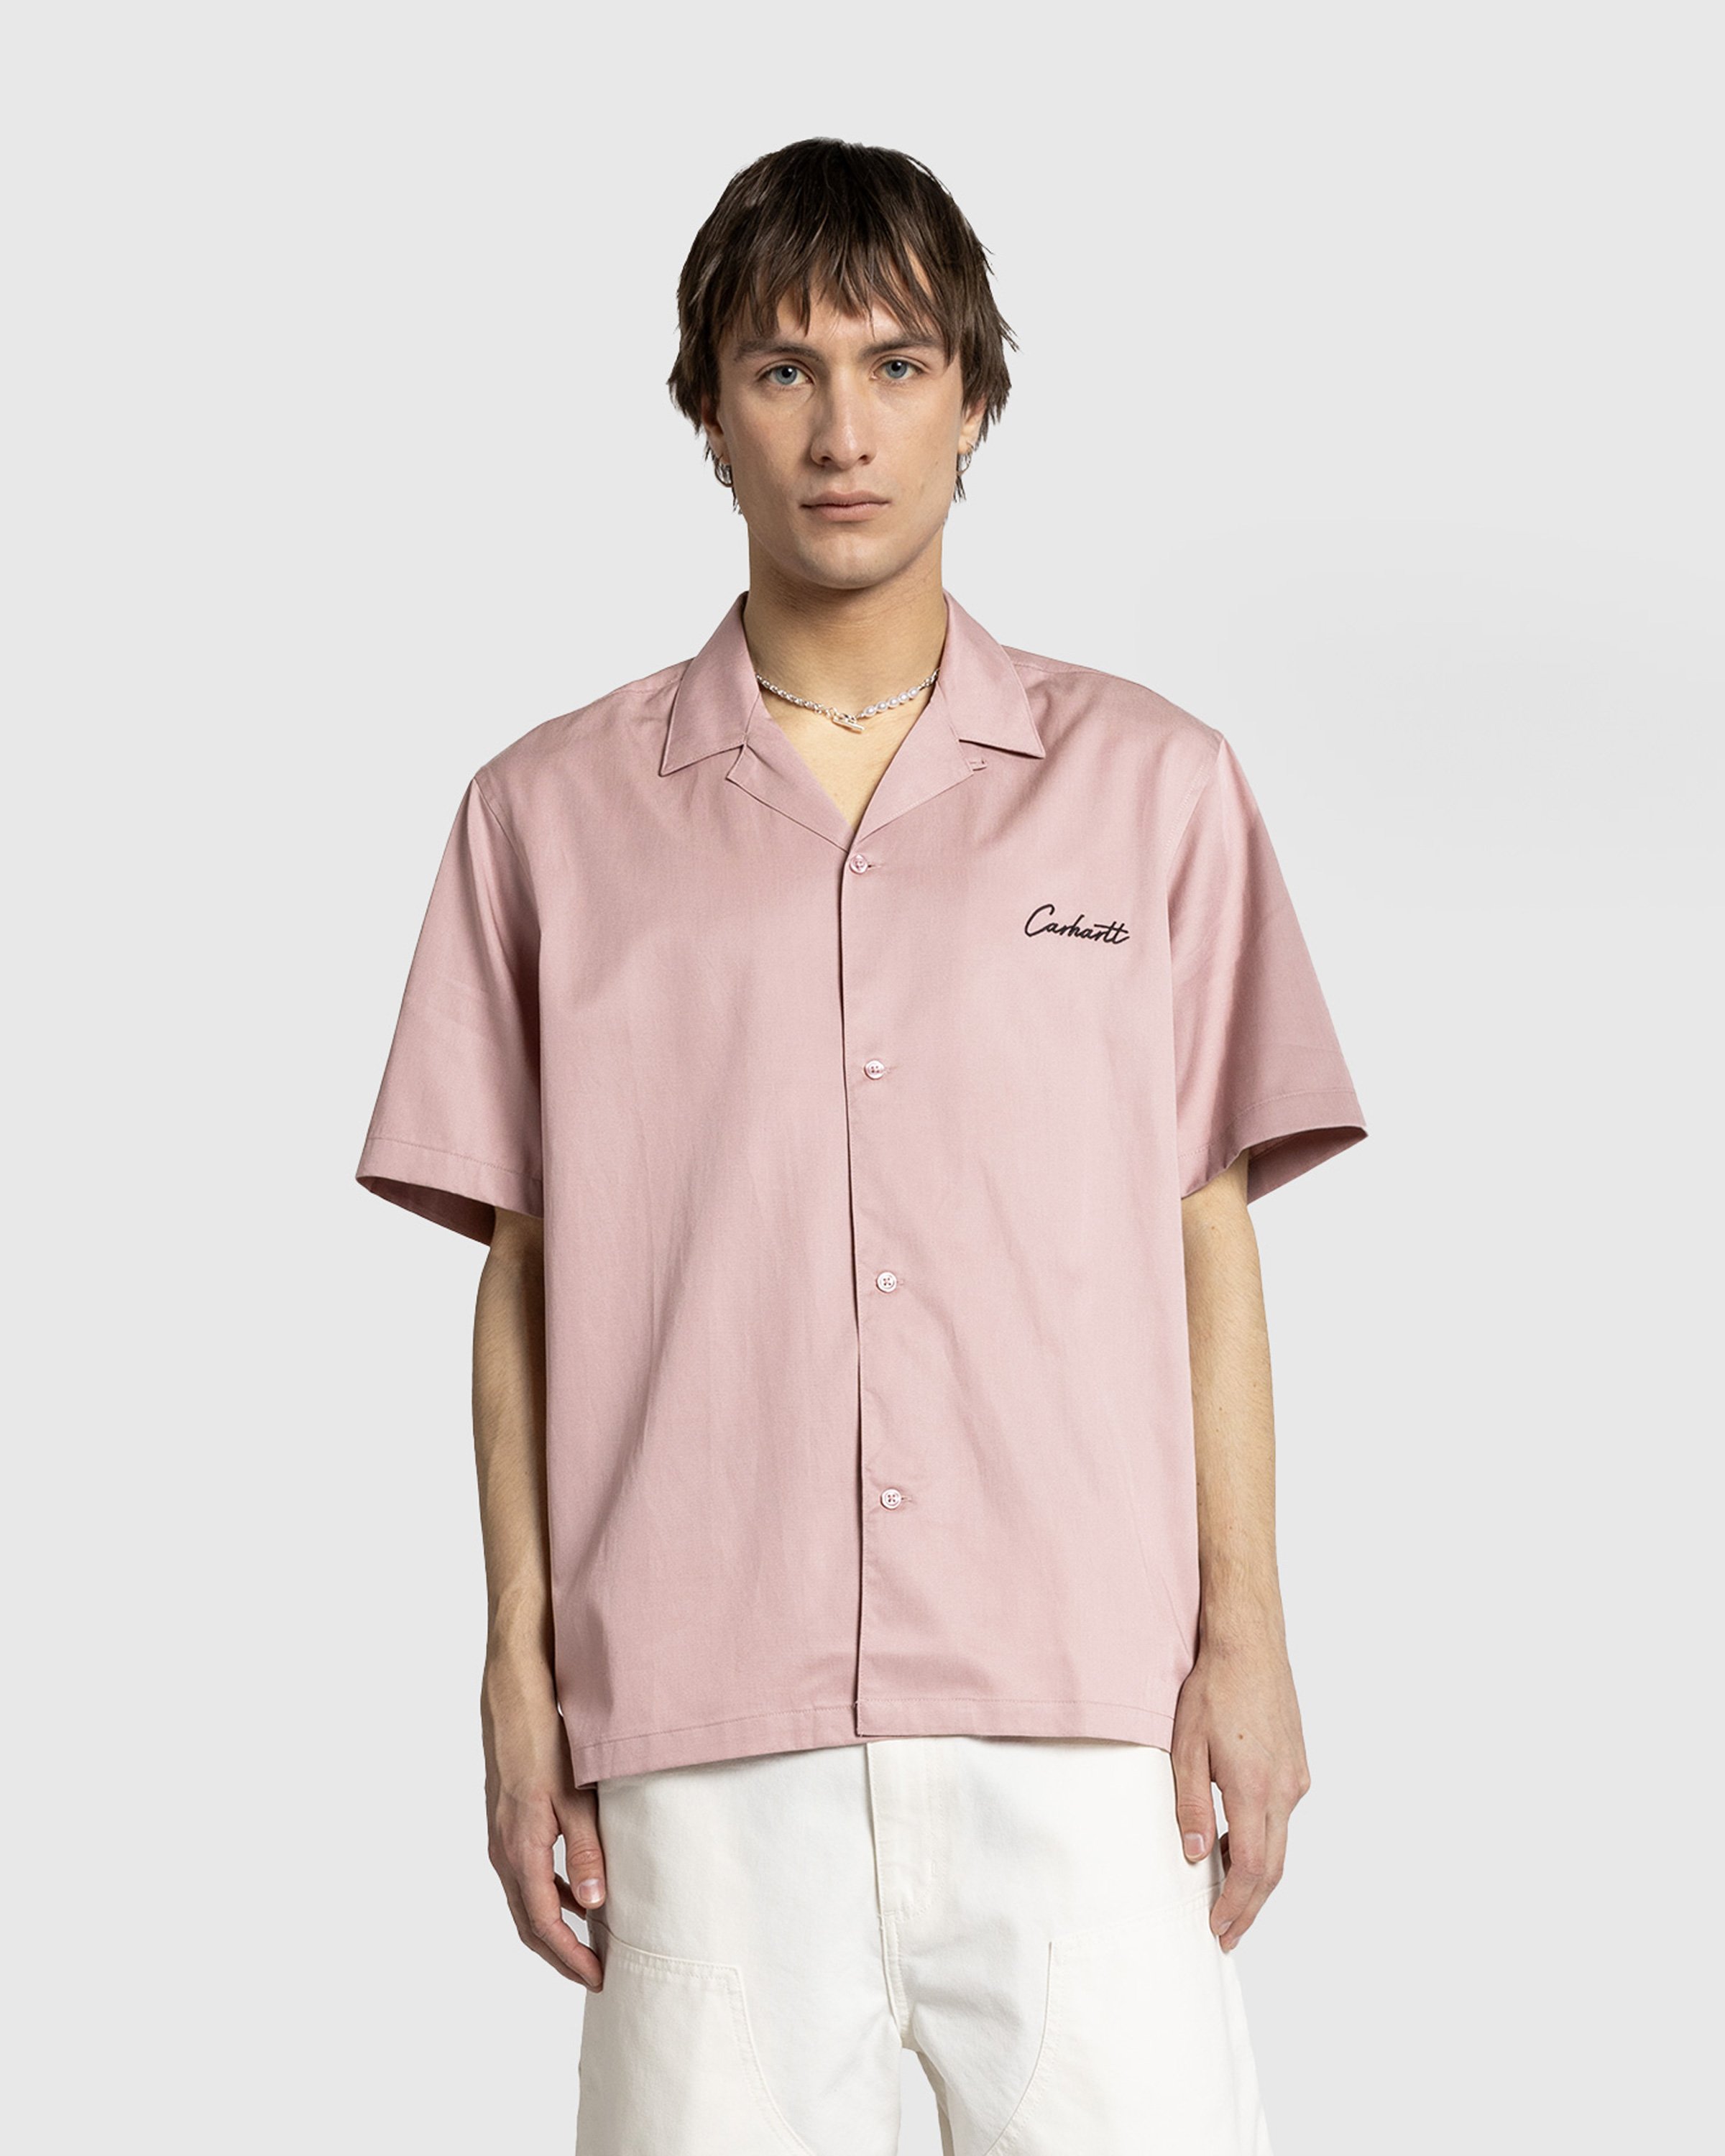 Carhartt WIP - S/S Delray Shirt Glassy Pink / Black - Clothing - Pink - Image 2